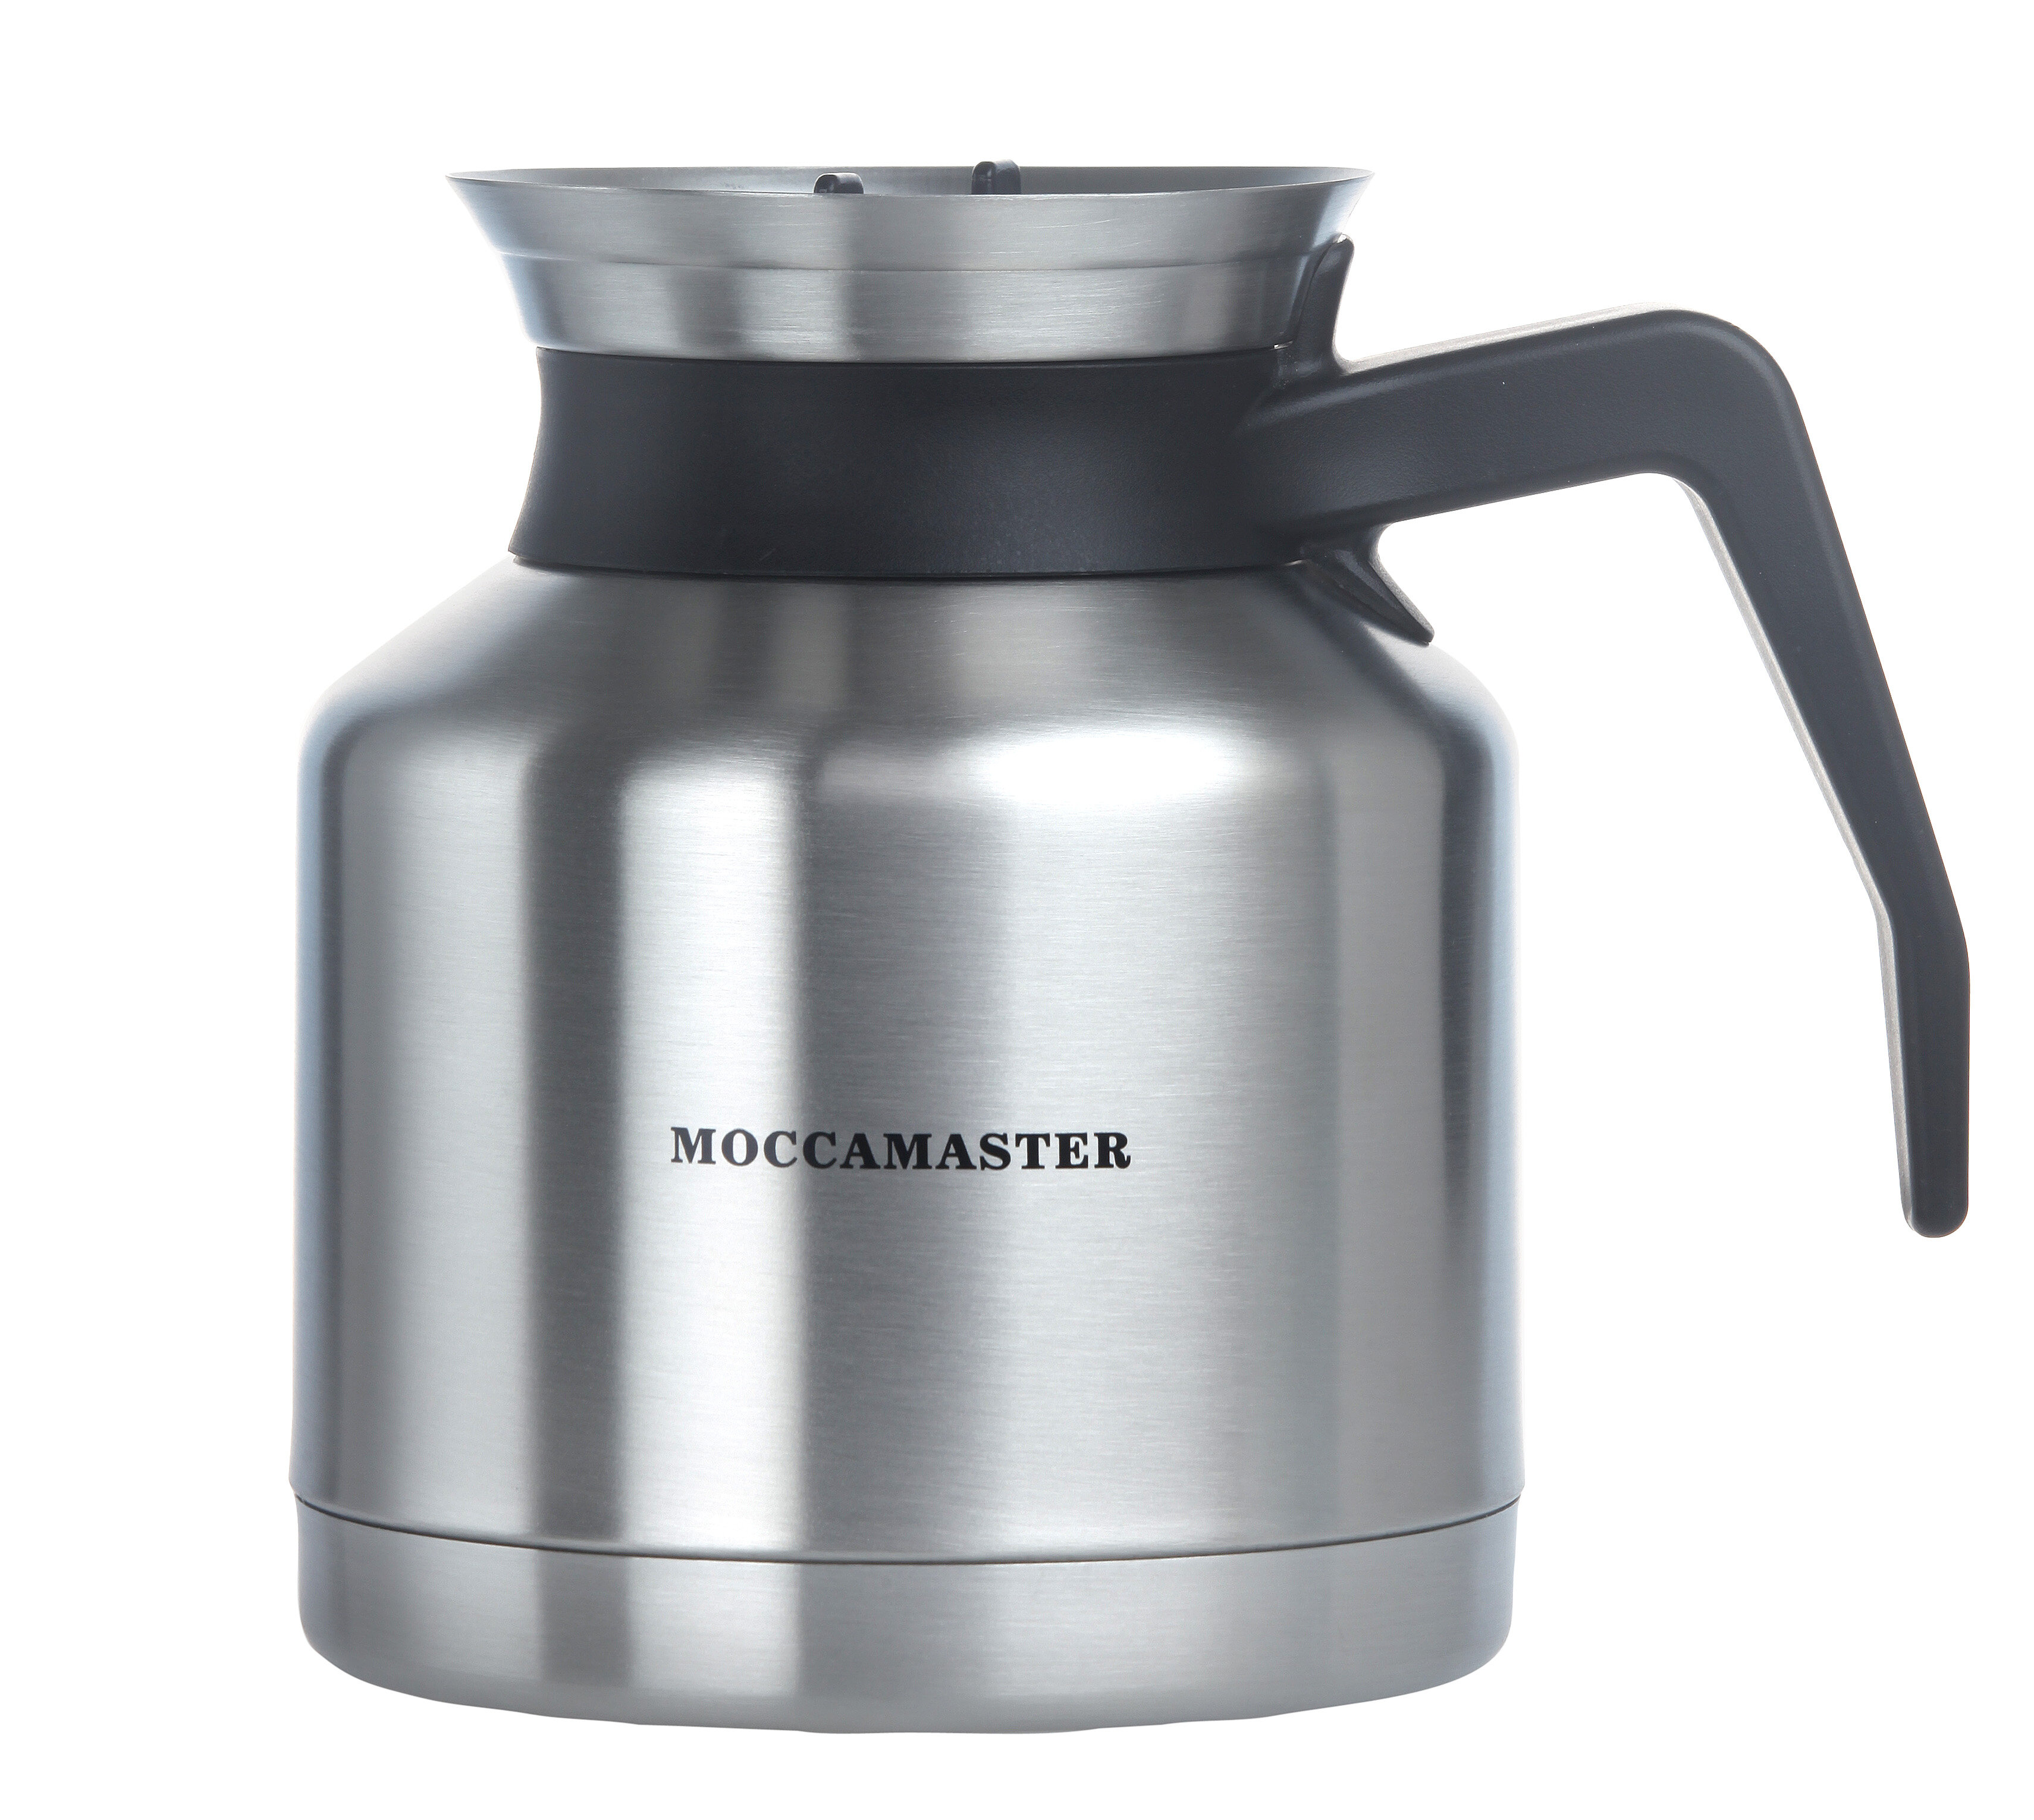 TOMAKEIT Insulated Stainless Steel Airpot Thermal Coffee Carafe